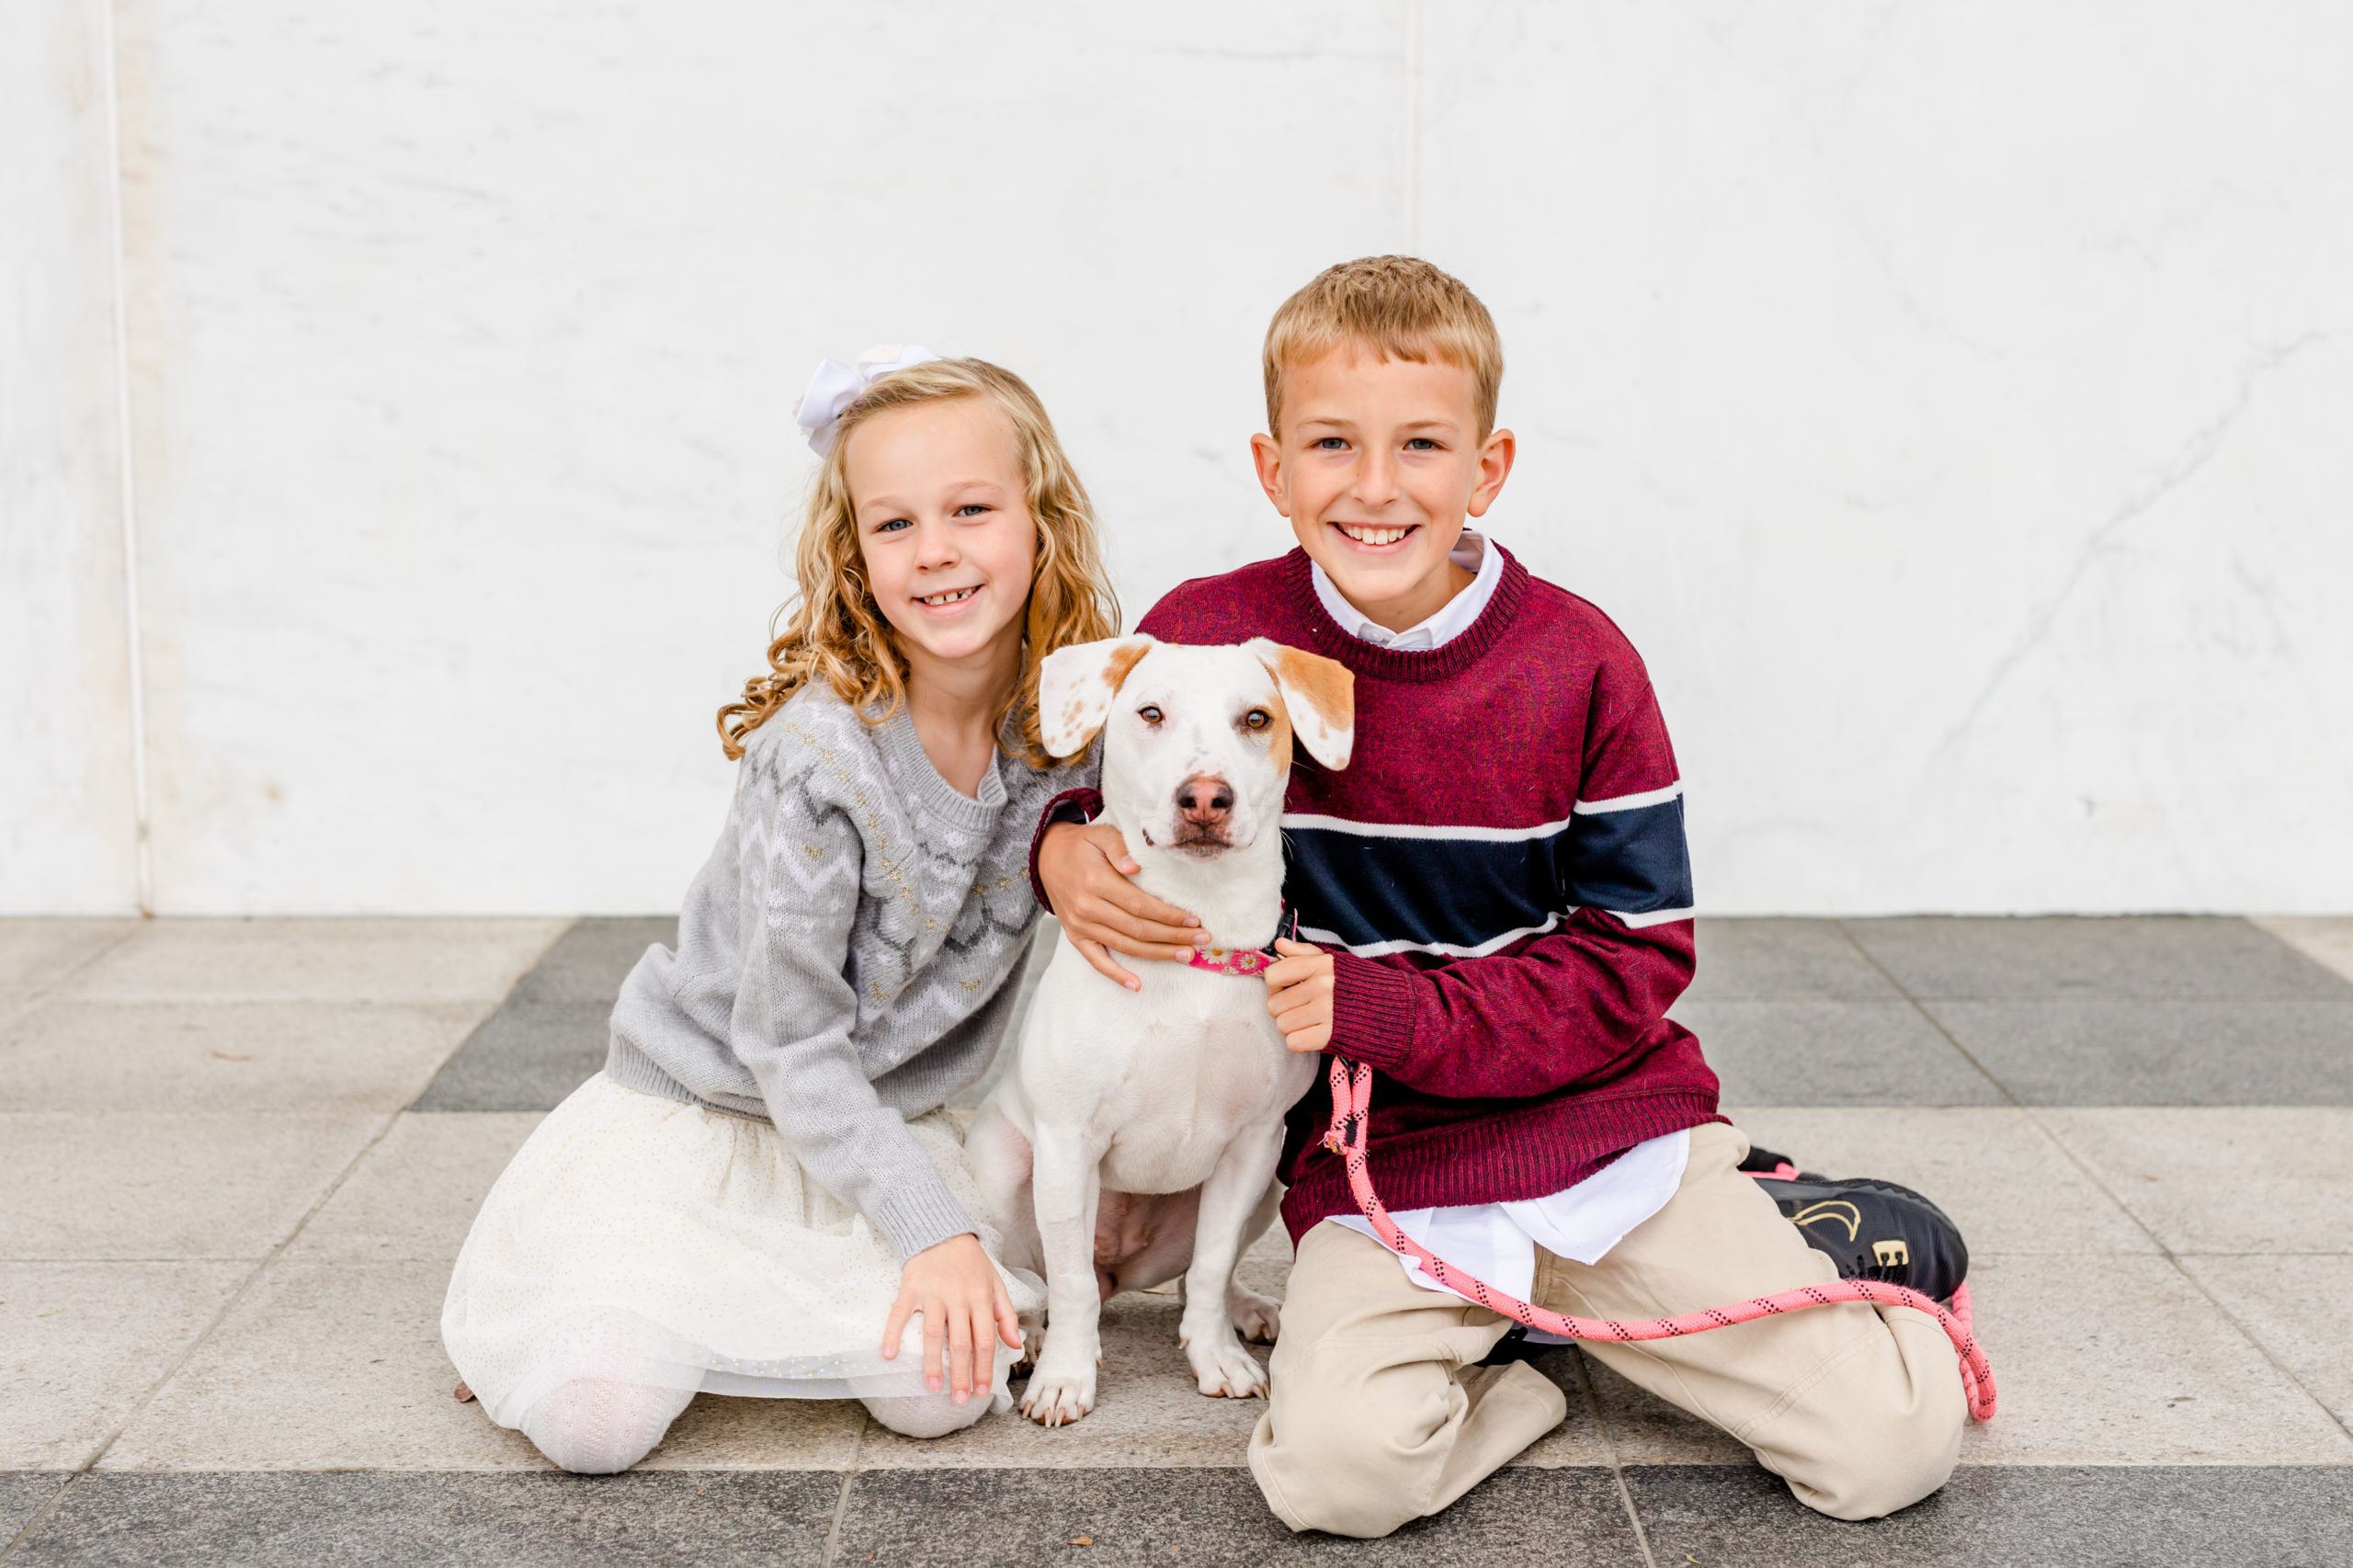 family photography session tips, family session tips, family photography tips, family photo shoot tips, ideas for family photos, Arlington Virginia photographer, family mini sessions, Rachel E.H. Photography, Washington D.C. photographer, white dog, blonde kids, kids smiling